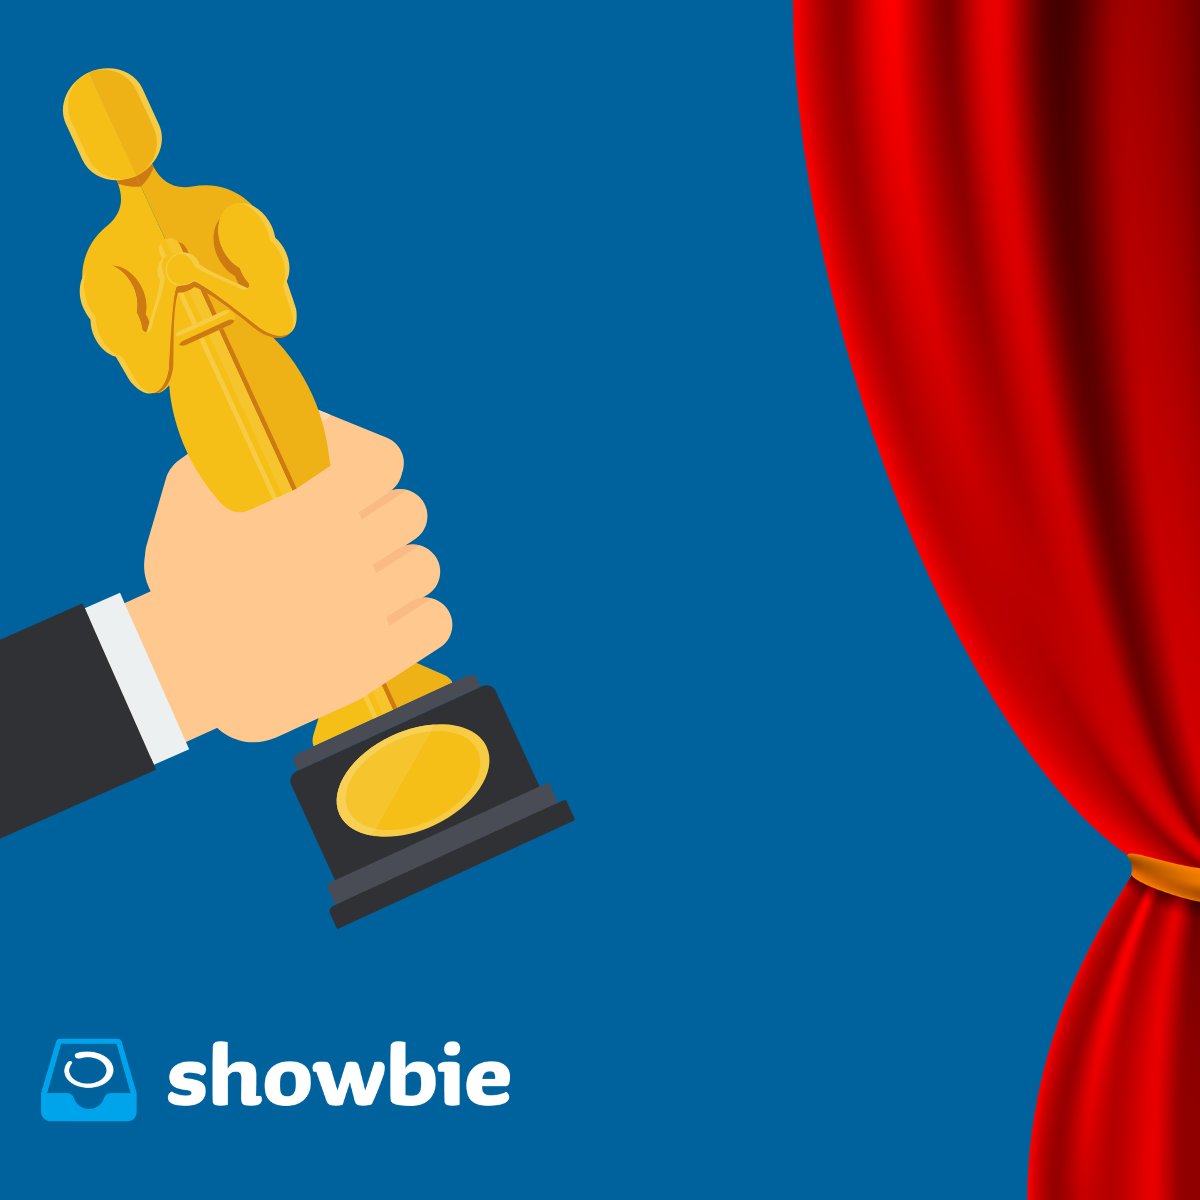 🏆We're proud to be named one of the Top 100 Edtech Companies in the World by @TIME! As the #edtech landscape evolves, Showbie is committed to providing innovative solutions that create engaging, personalised learning experiences for all students. 💙🚀 ow.ly/xswb50RoKs1